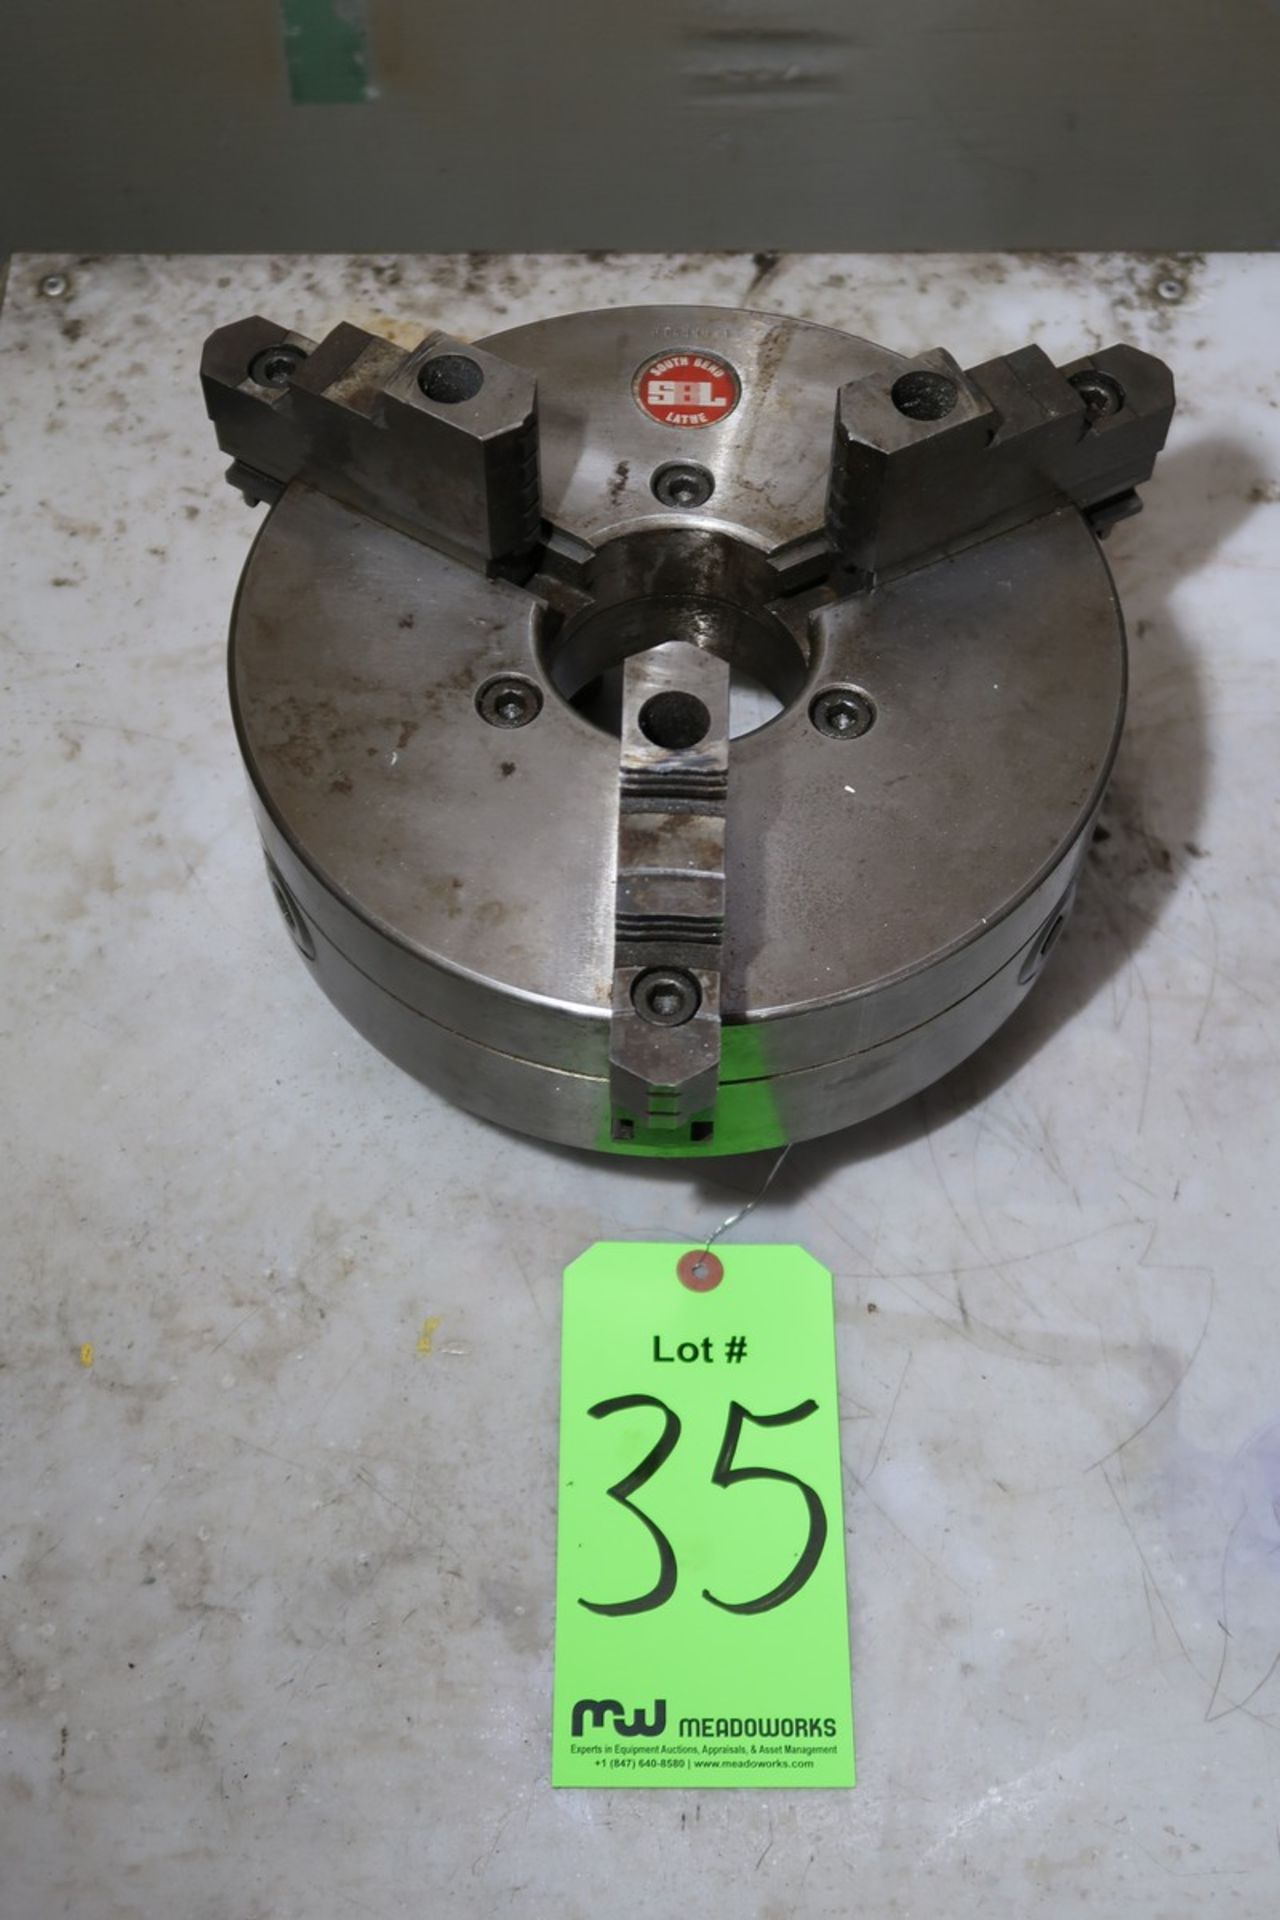 South Bend 10" 3-Jaw Chuck